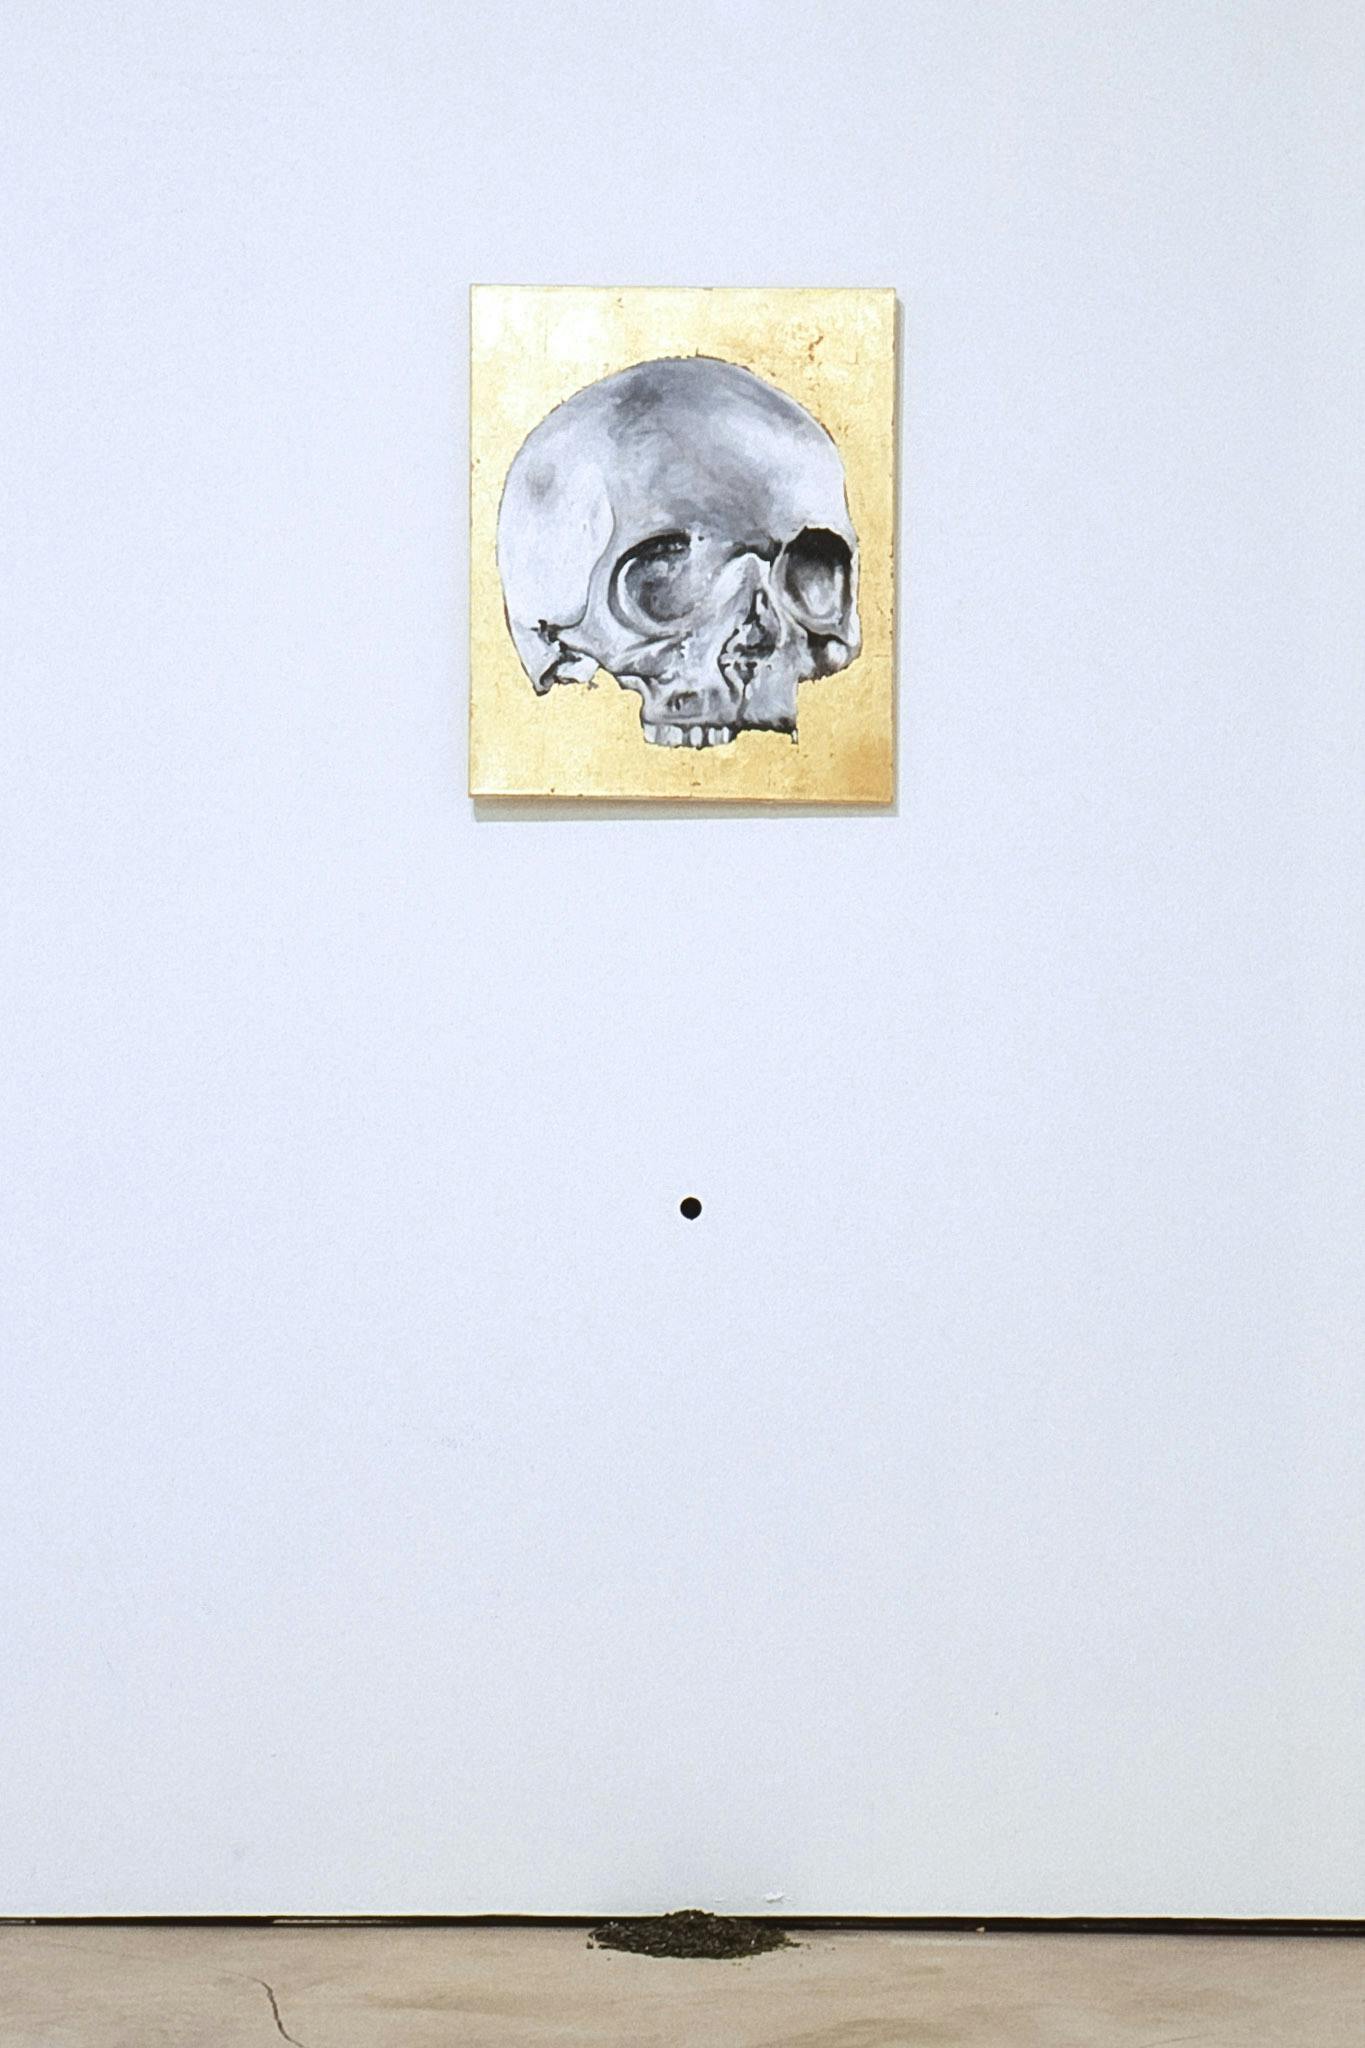 A small gold painting, foregrounded by a silver skull, is mounted on the gallery wall. A small hole is made on the wall beneath where the painting is hung. A dirt pile is on the floor under the hole.